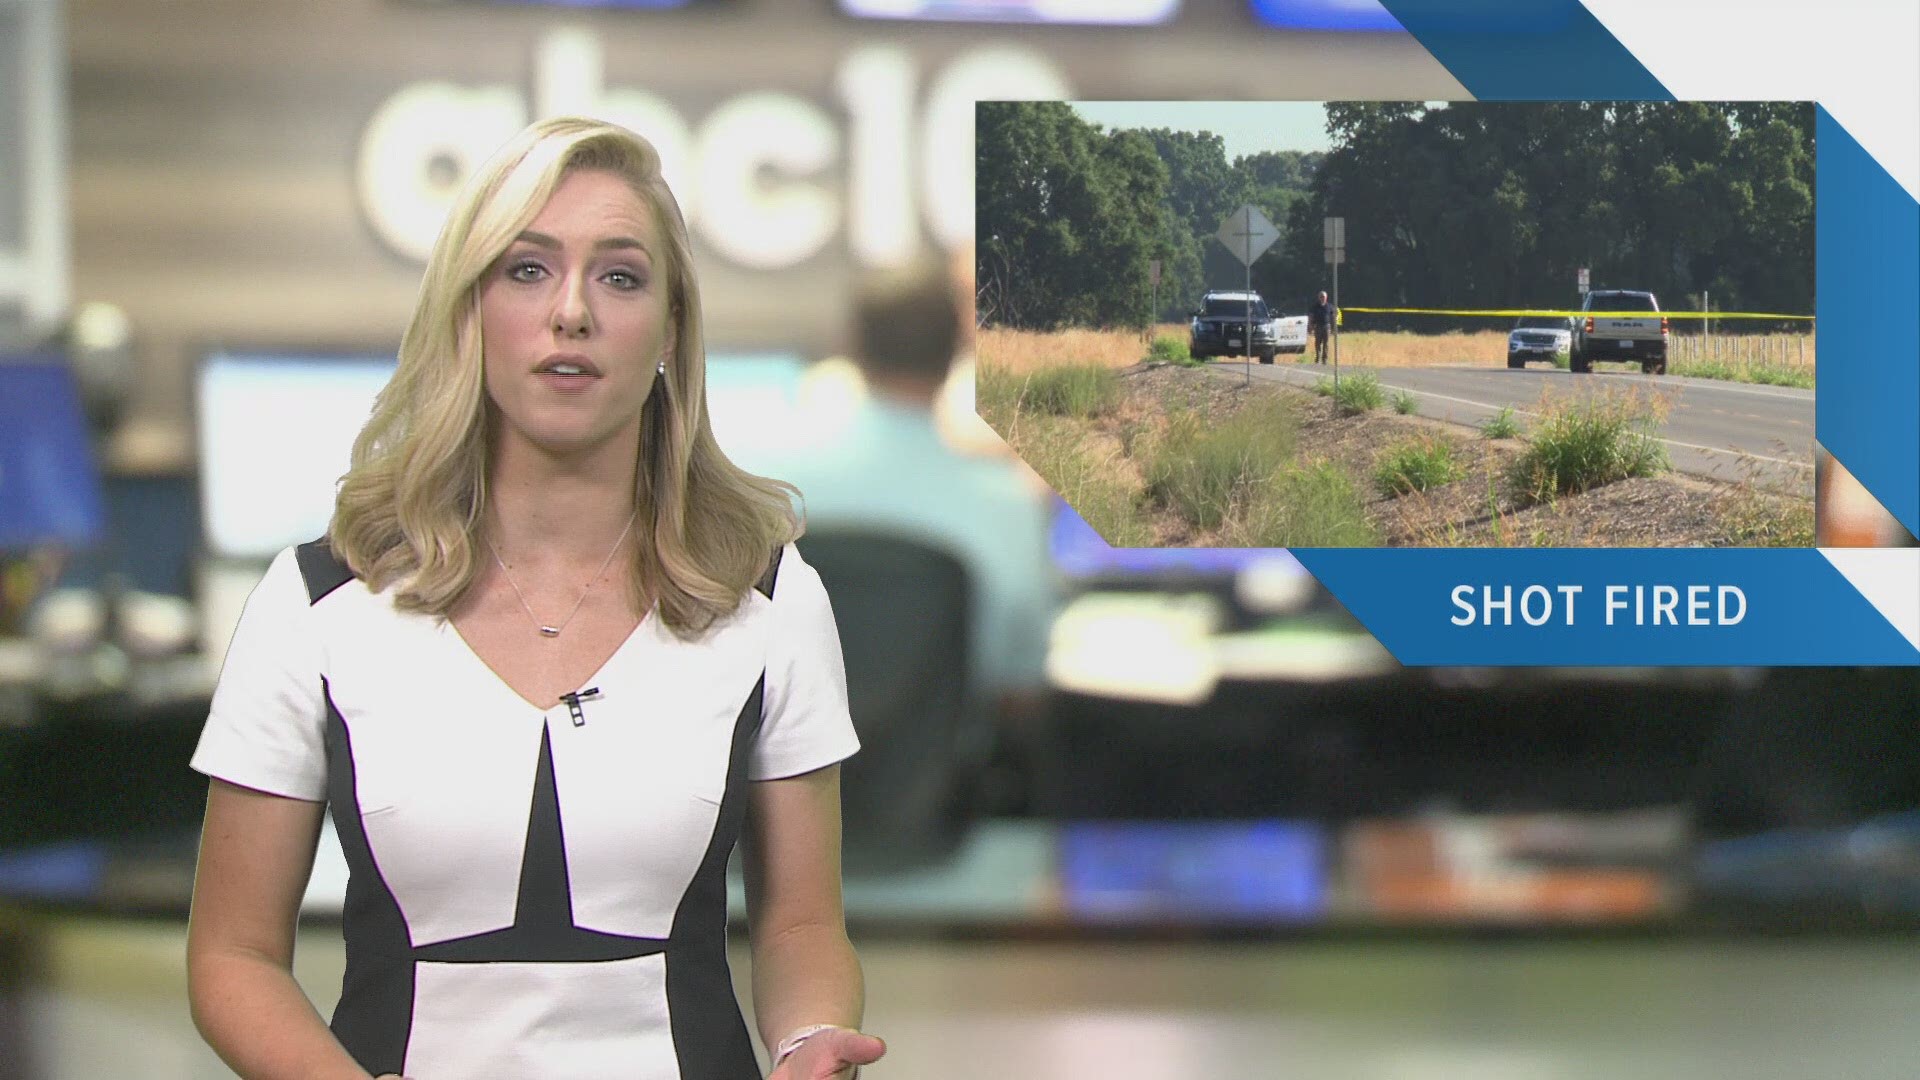 Evening Headlines: August 14, 2019 | Catch in-depth reporting on #LateNewsTonight at 11 p.m. | The latest Sacramento news is always at www.abc10.com